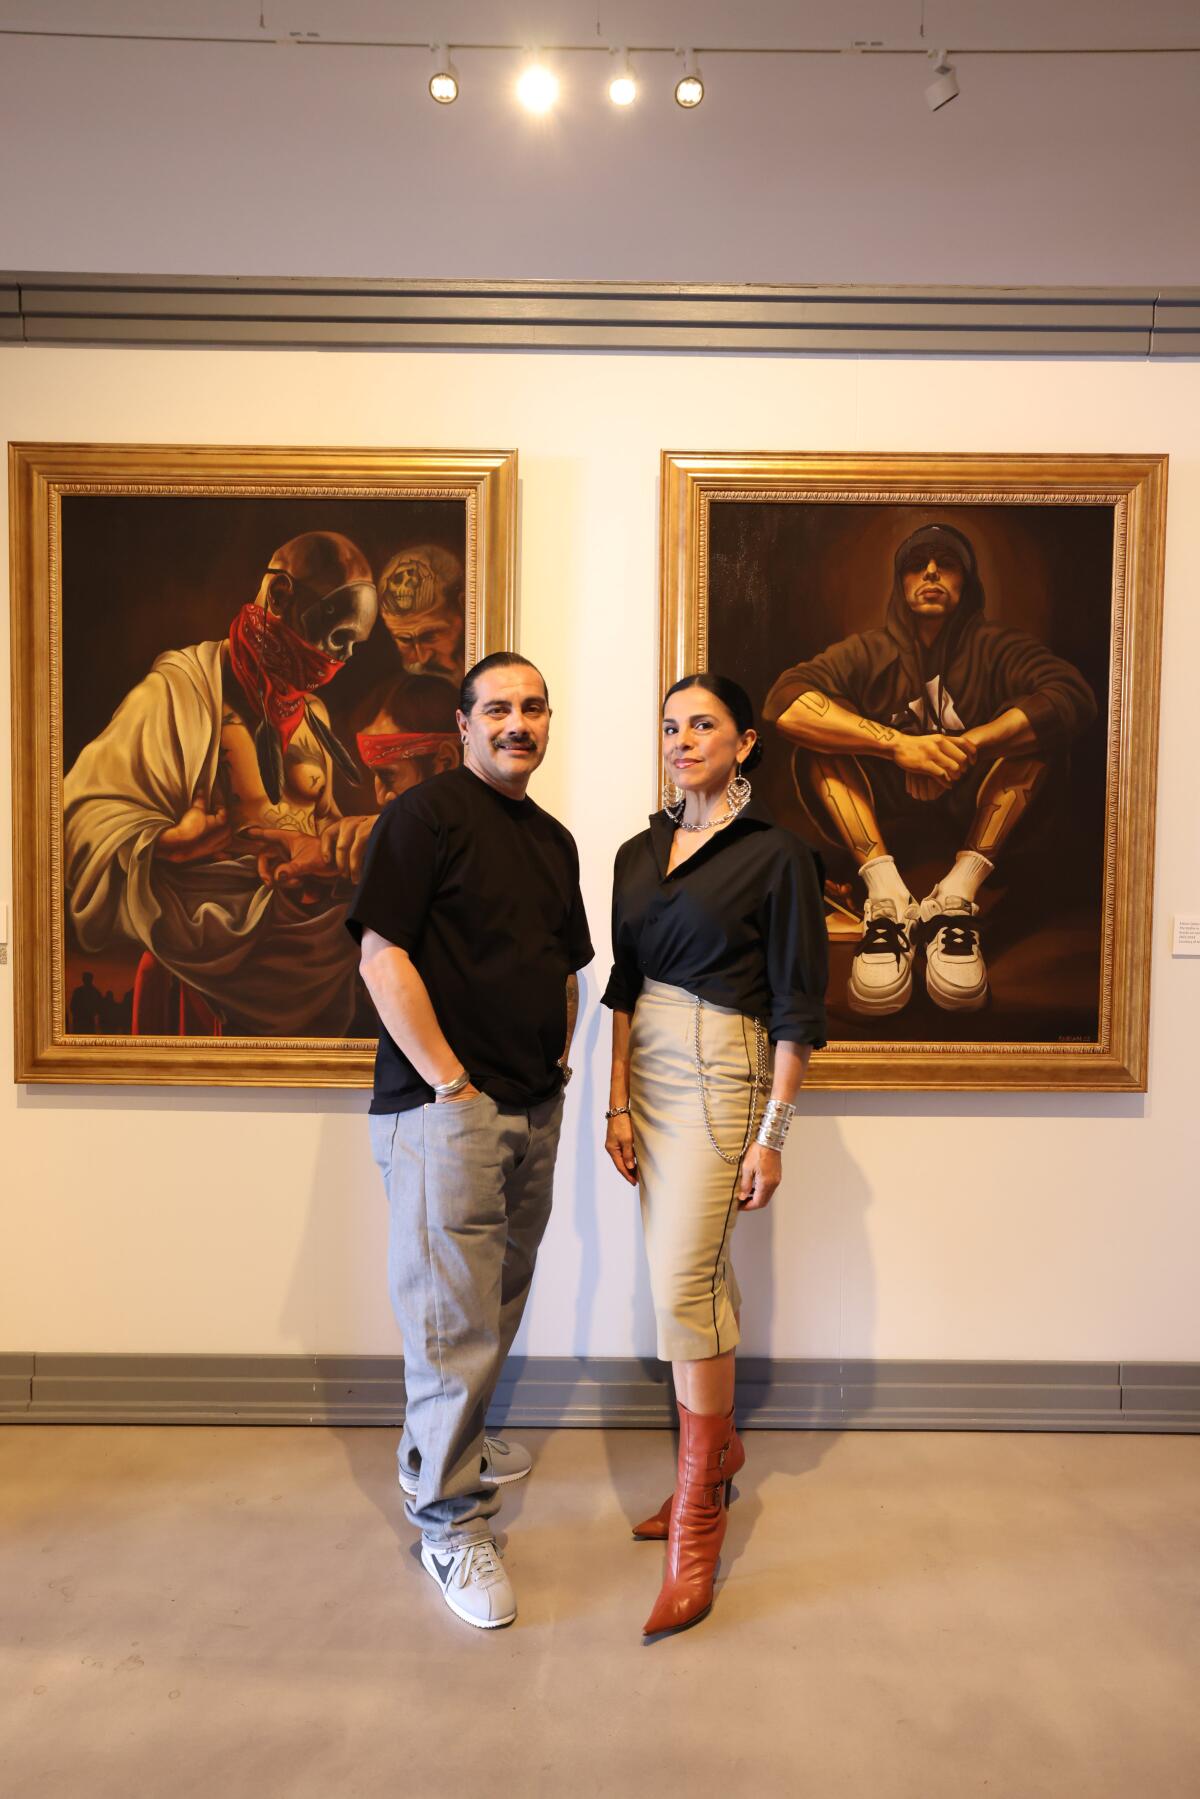 A man and woman stand in front of two paintings of people.